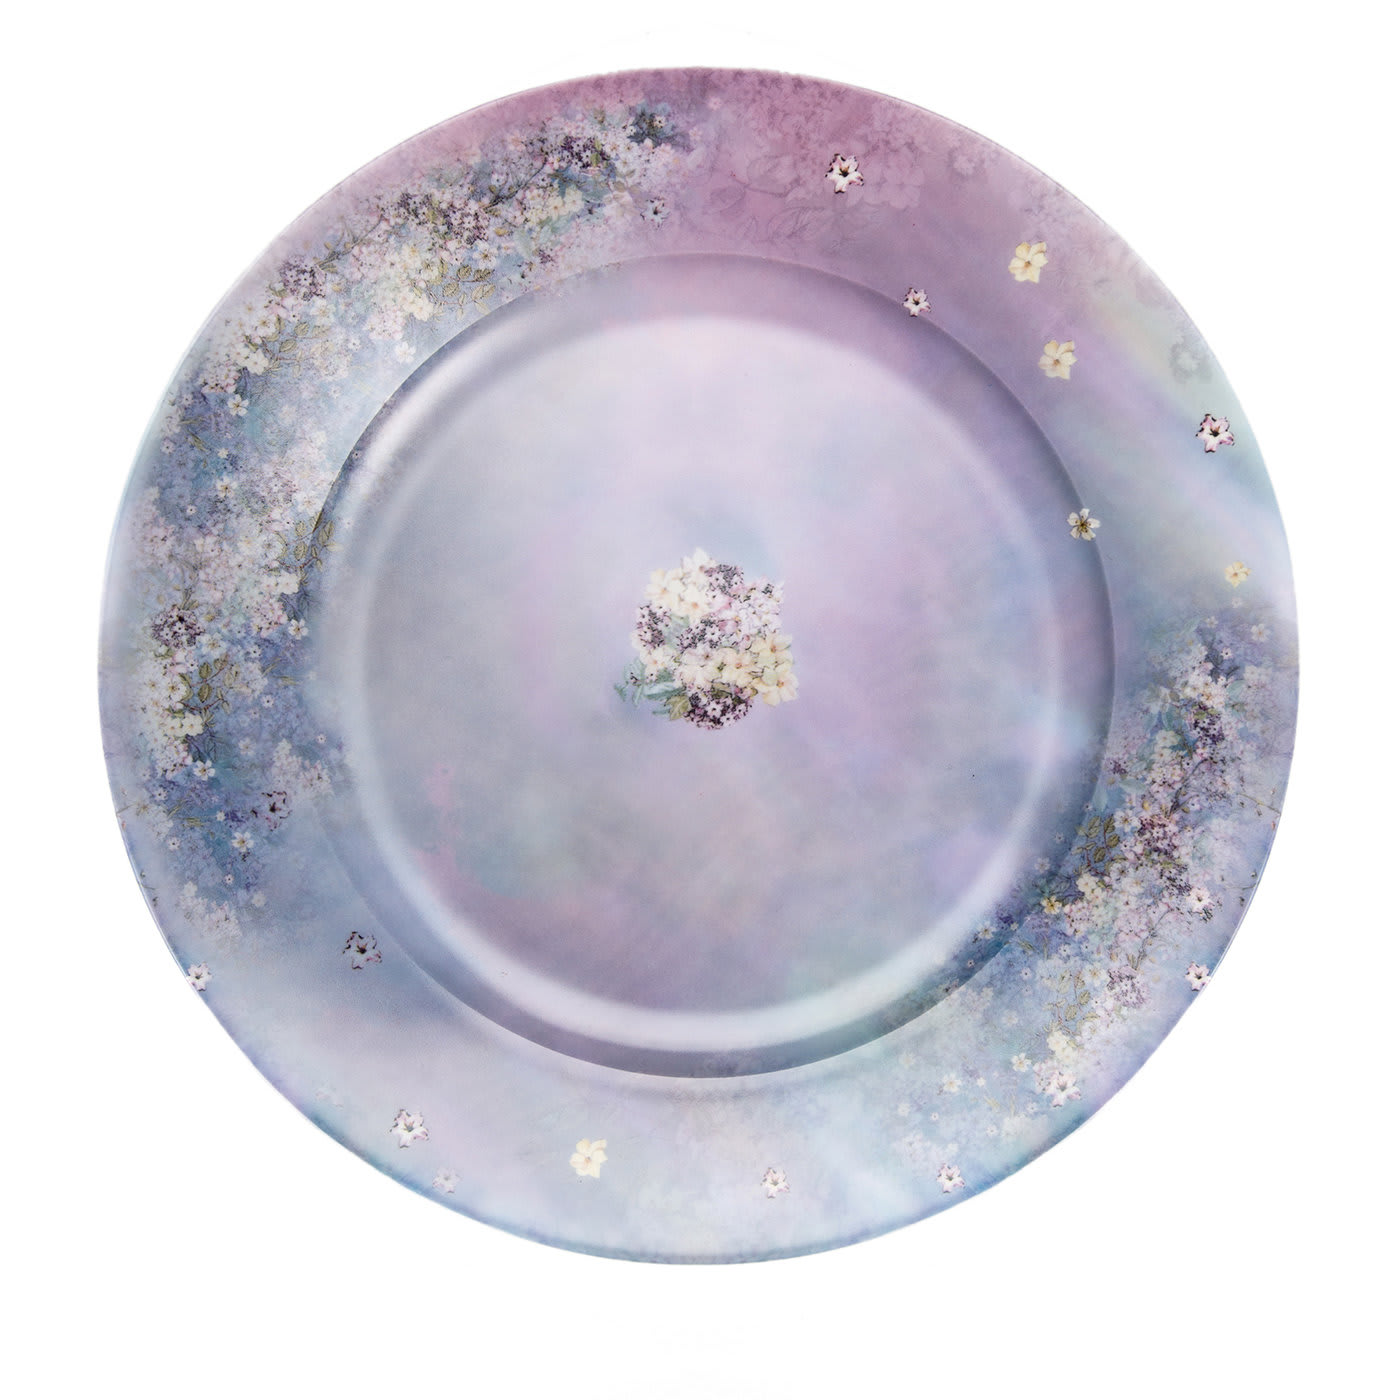 Shaded Blossom Set of Two Dinner Plates - Luisa Beccaria